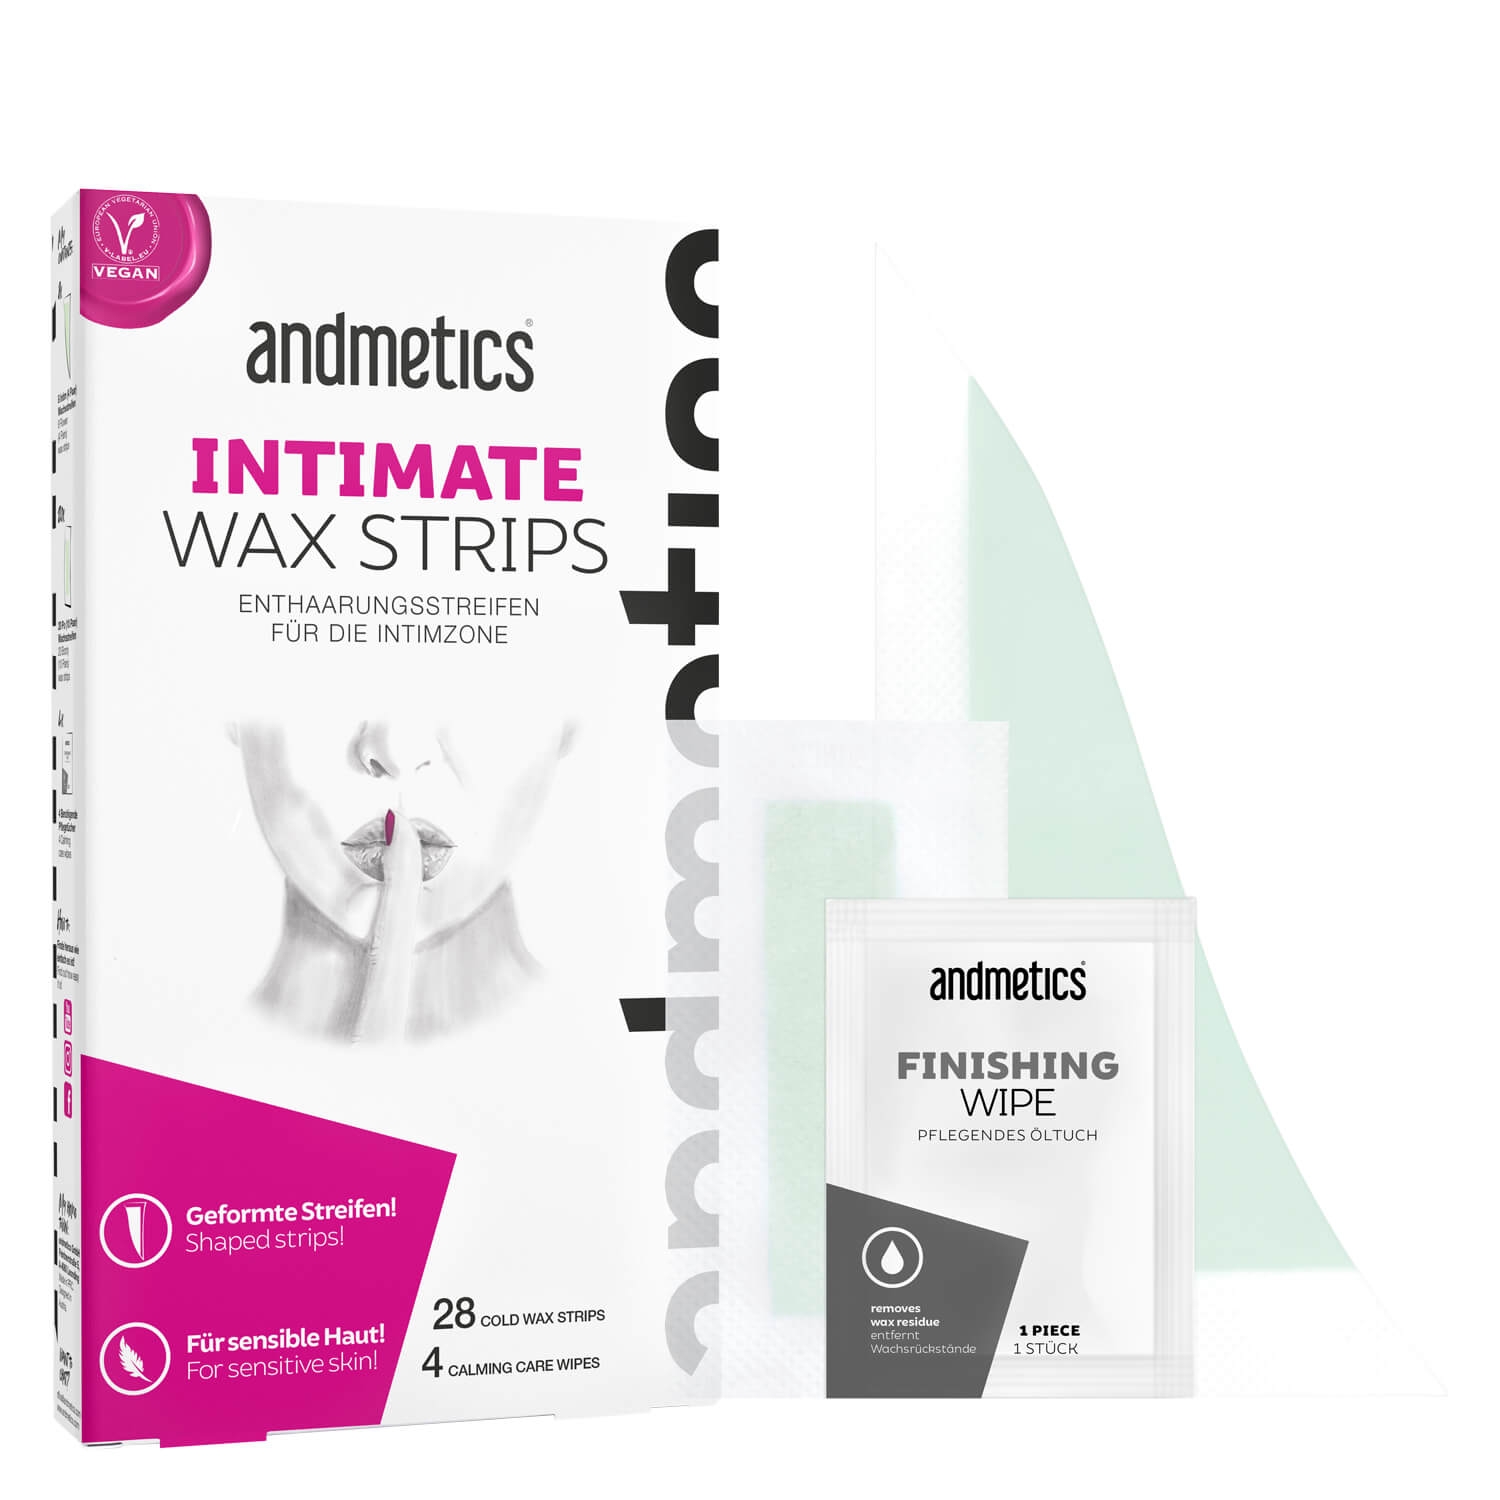 Product image from andmetics - Intimate Wax Strips